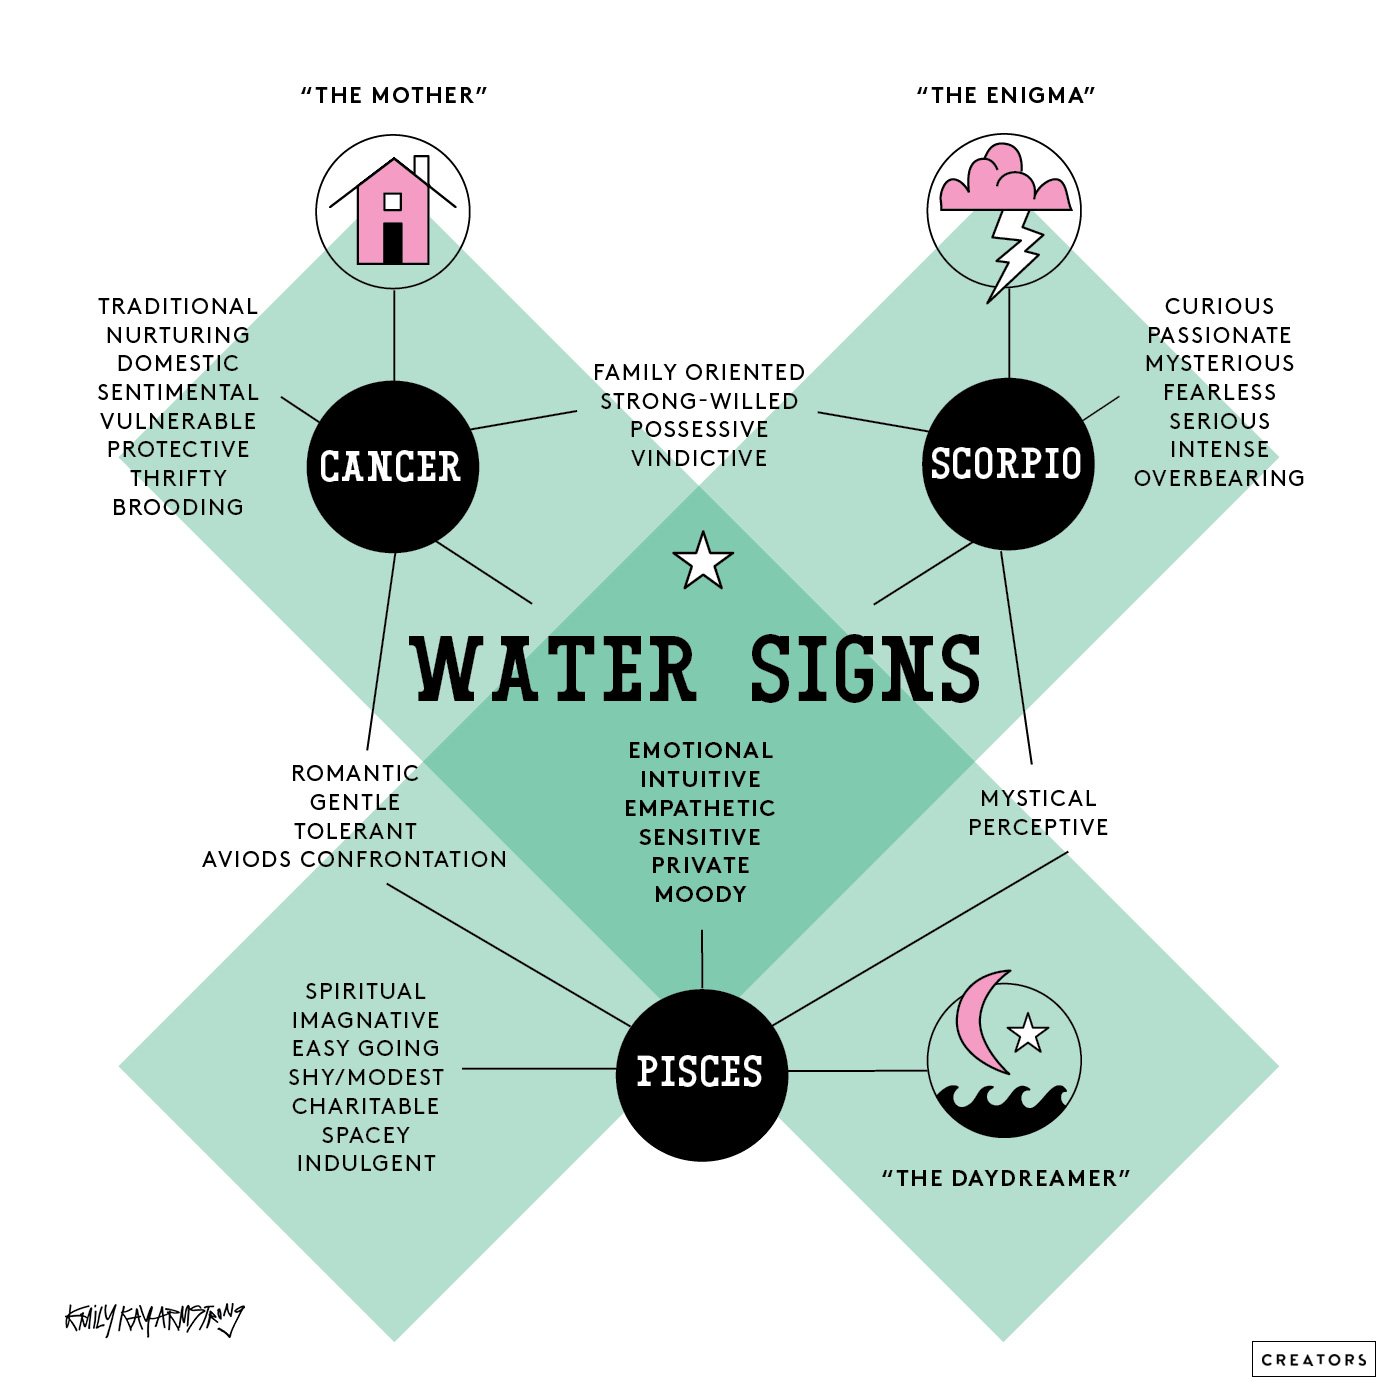 What are the water signs in astrology?